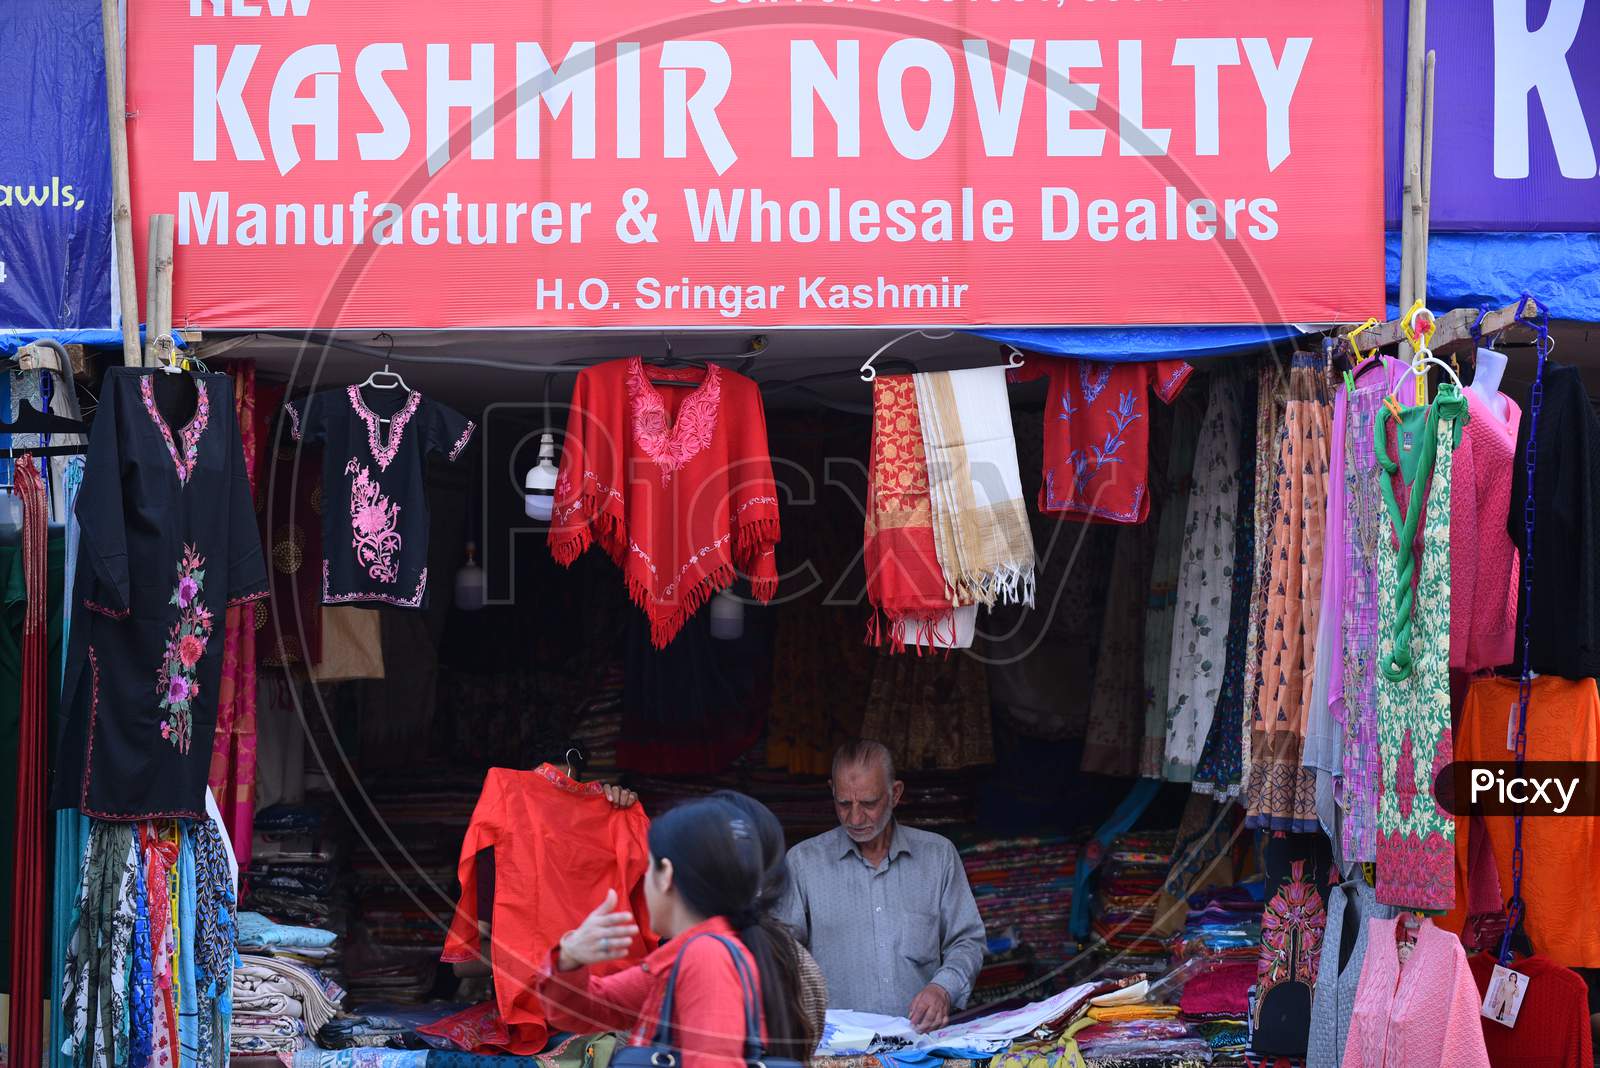 A Kashmiri Textile shop of shawls and kurtas in a stall at Numaish Exhibition